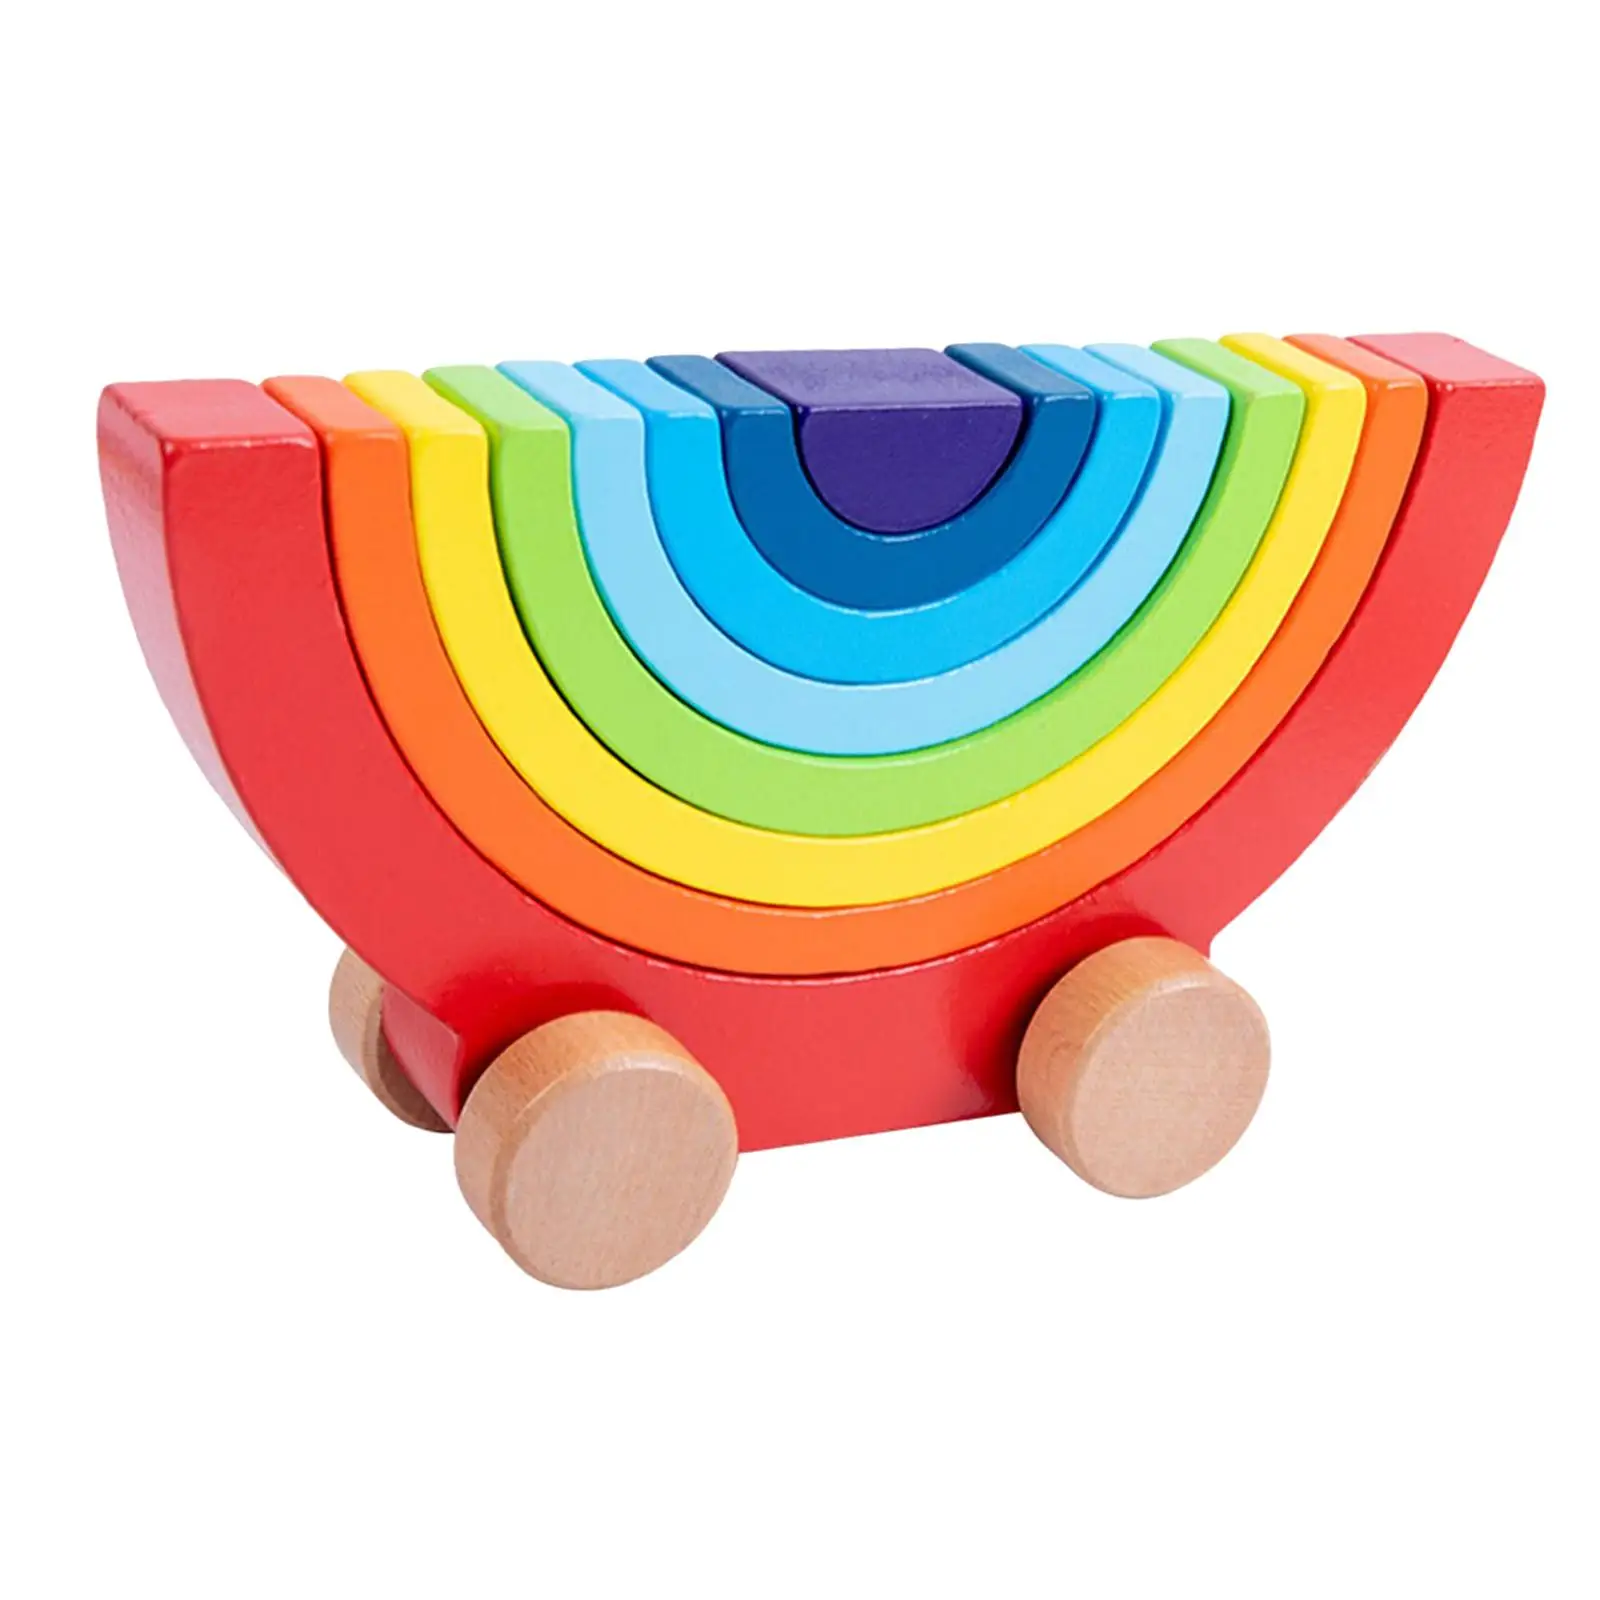 Wooden Building Blocks Car Toy Stacking Colorful Creative for Game Toddlers